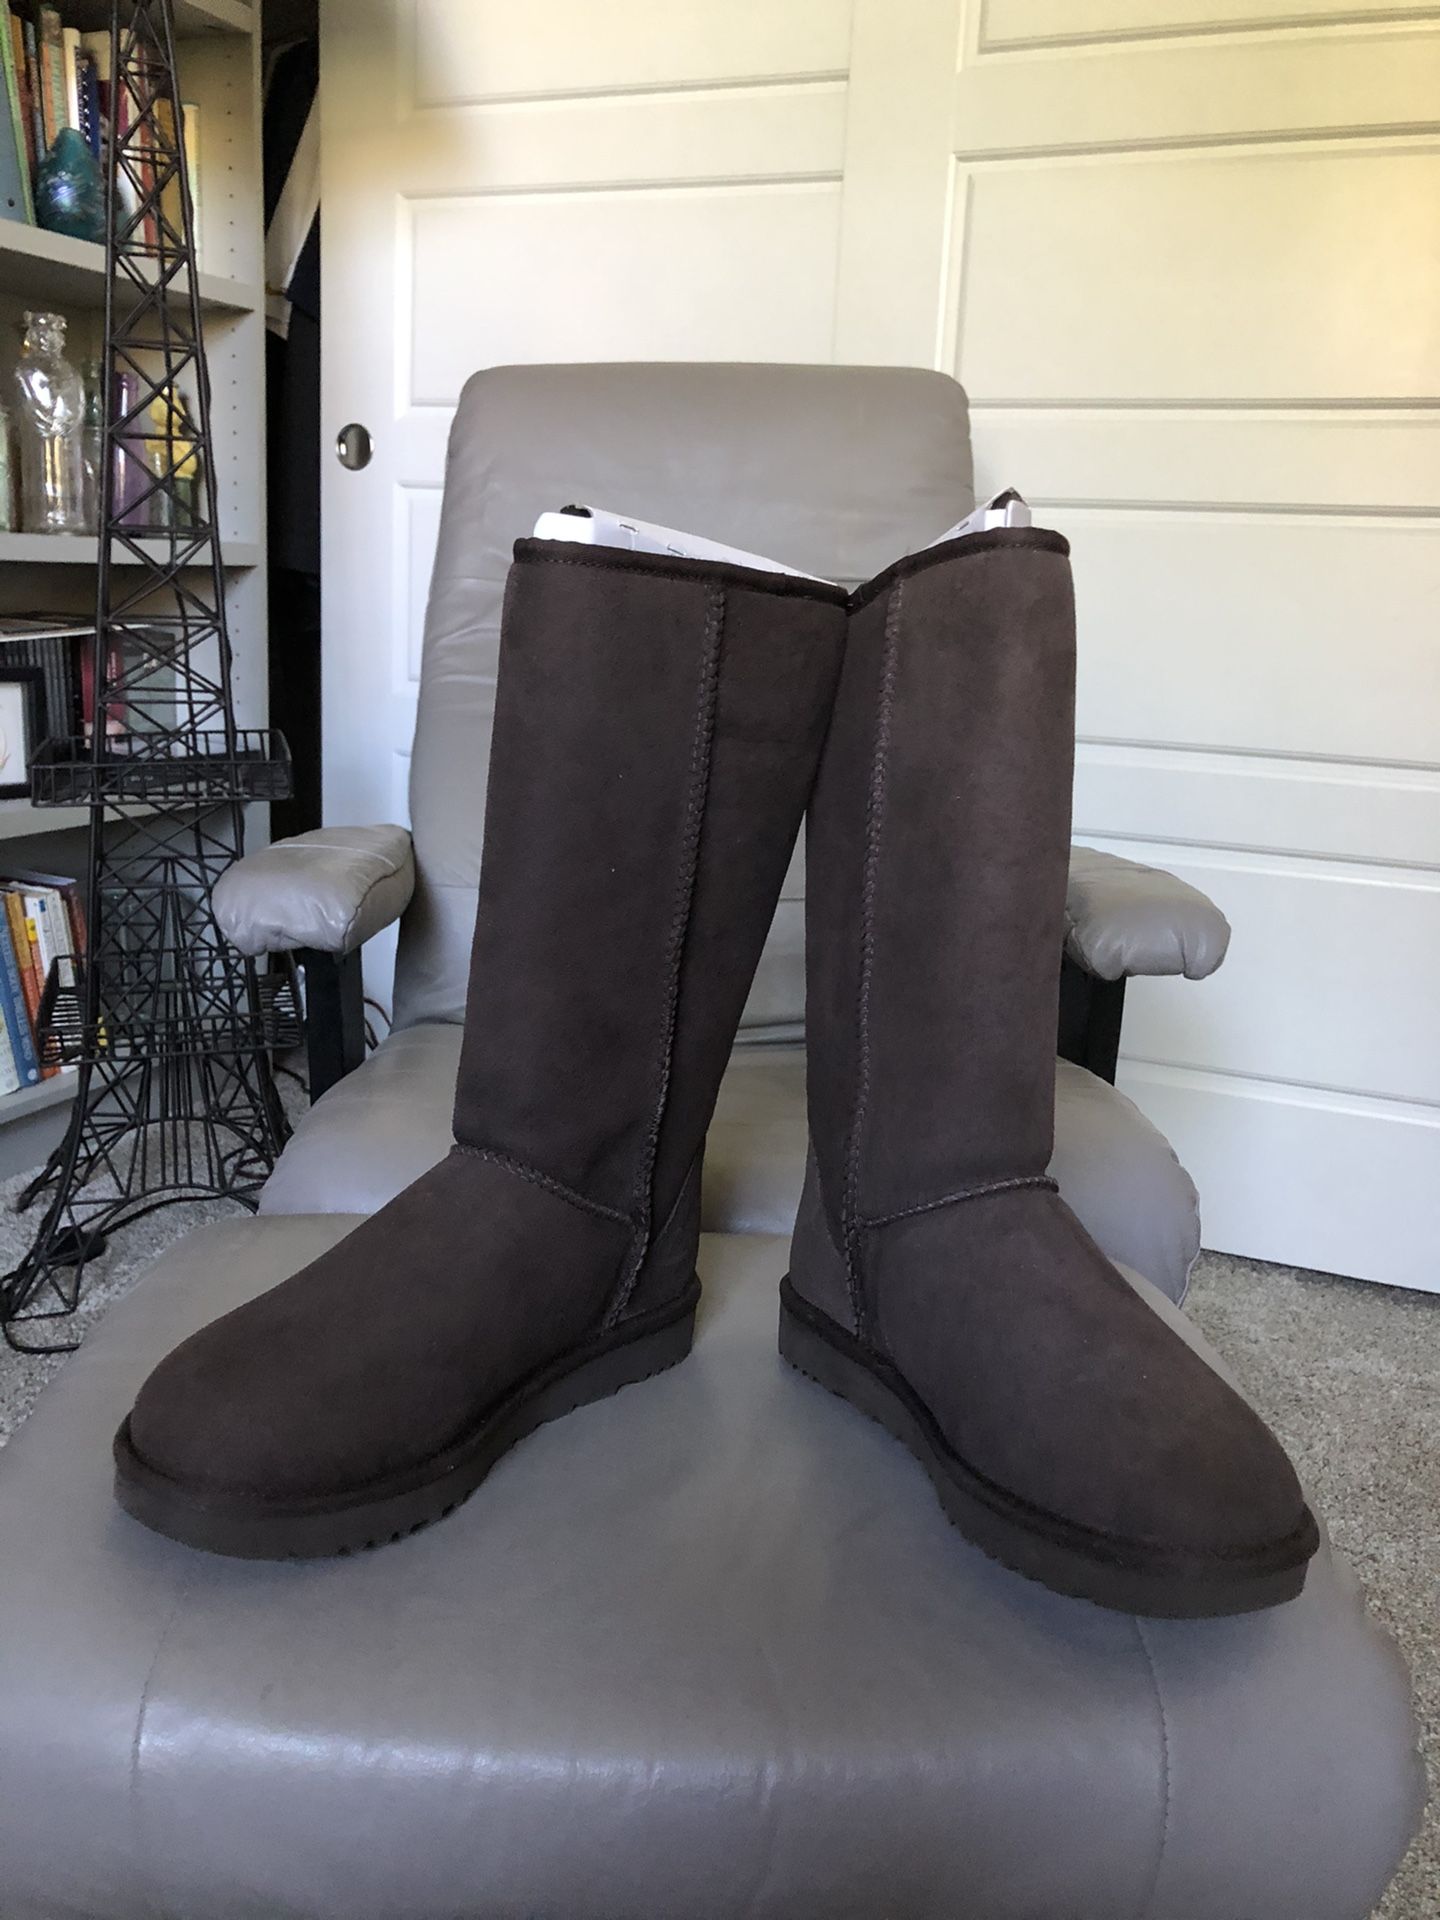 Women’s UGG suede leather boots brand new